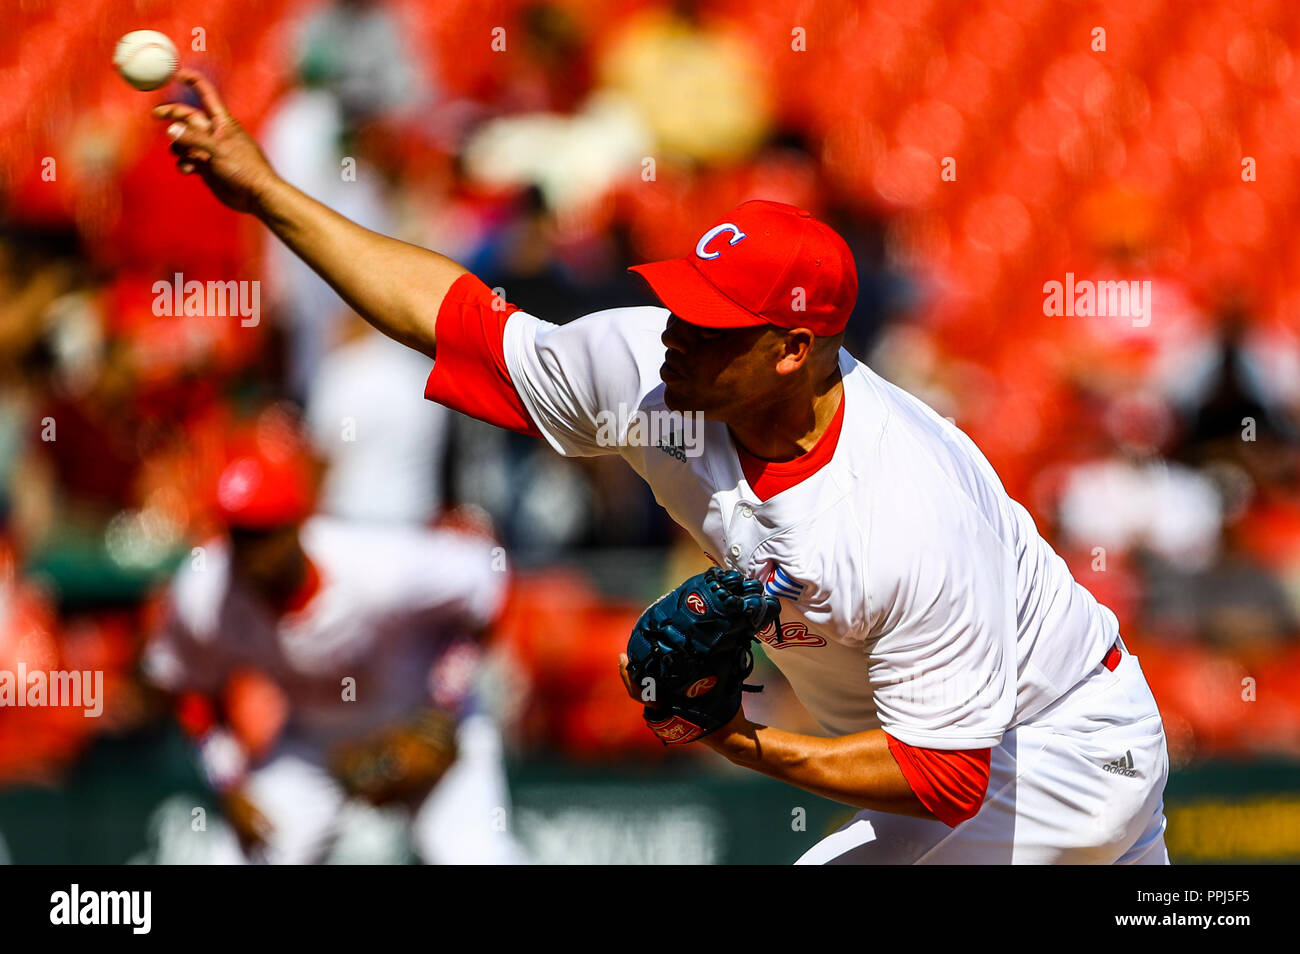 Lazaro Blanco, starting pitcher of the Alazanes of Granma Cuba, throws the ball in the first inning of the baseball game of the Caribbean Series again Stock Photo